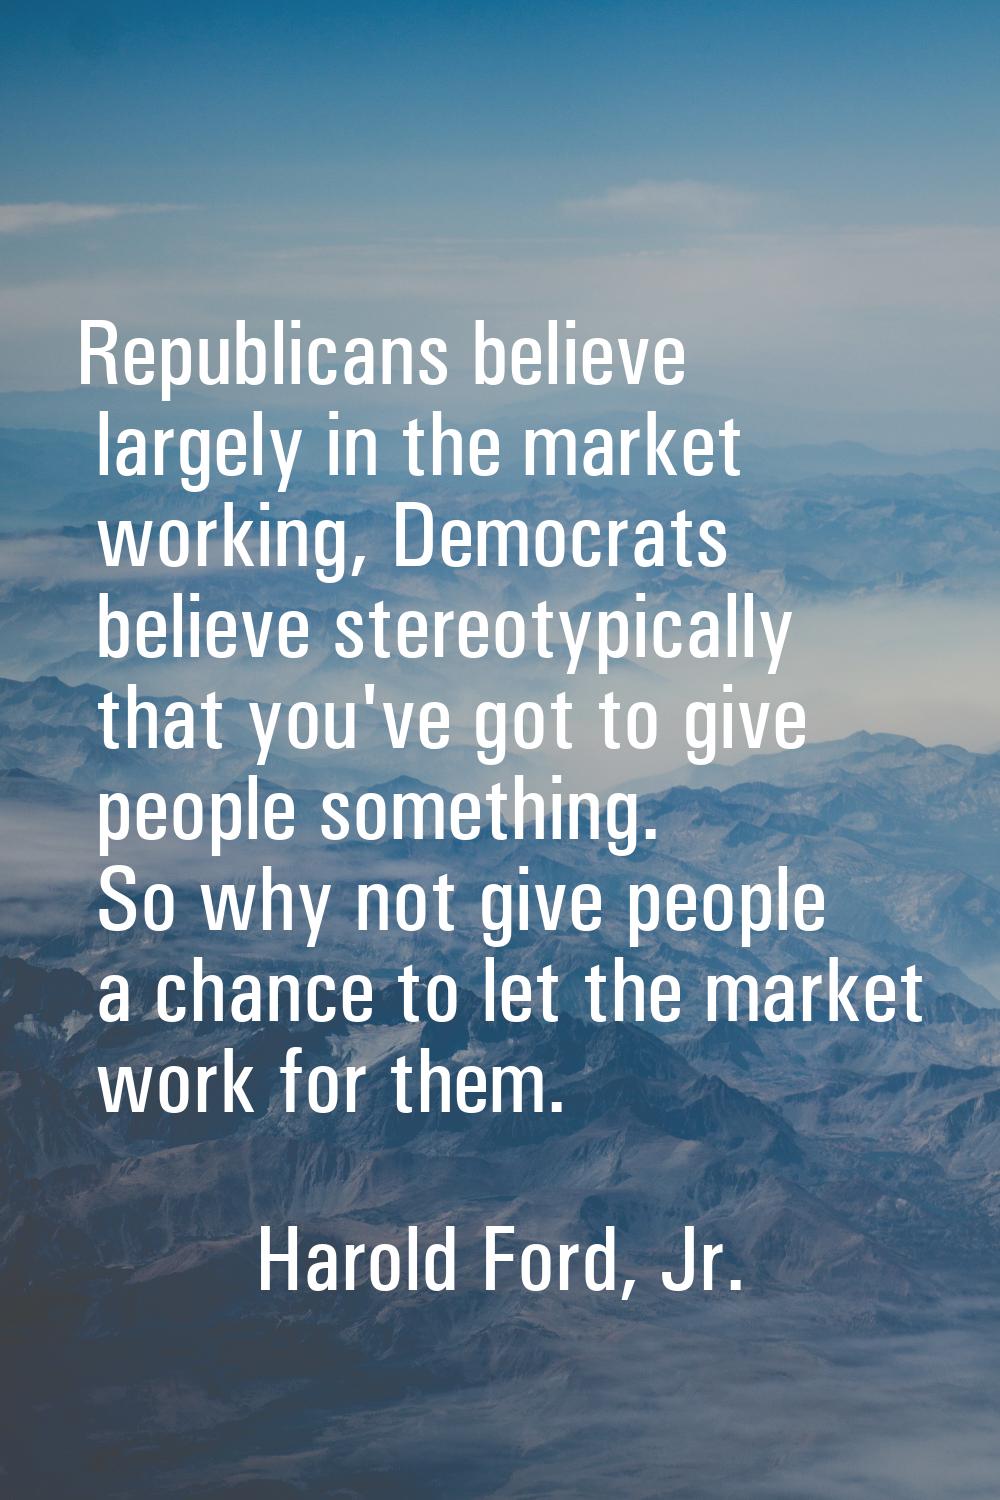 Republicans believe largely in the market working, Democrats believe stereotypically that you've go